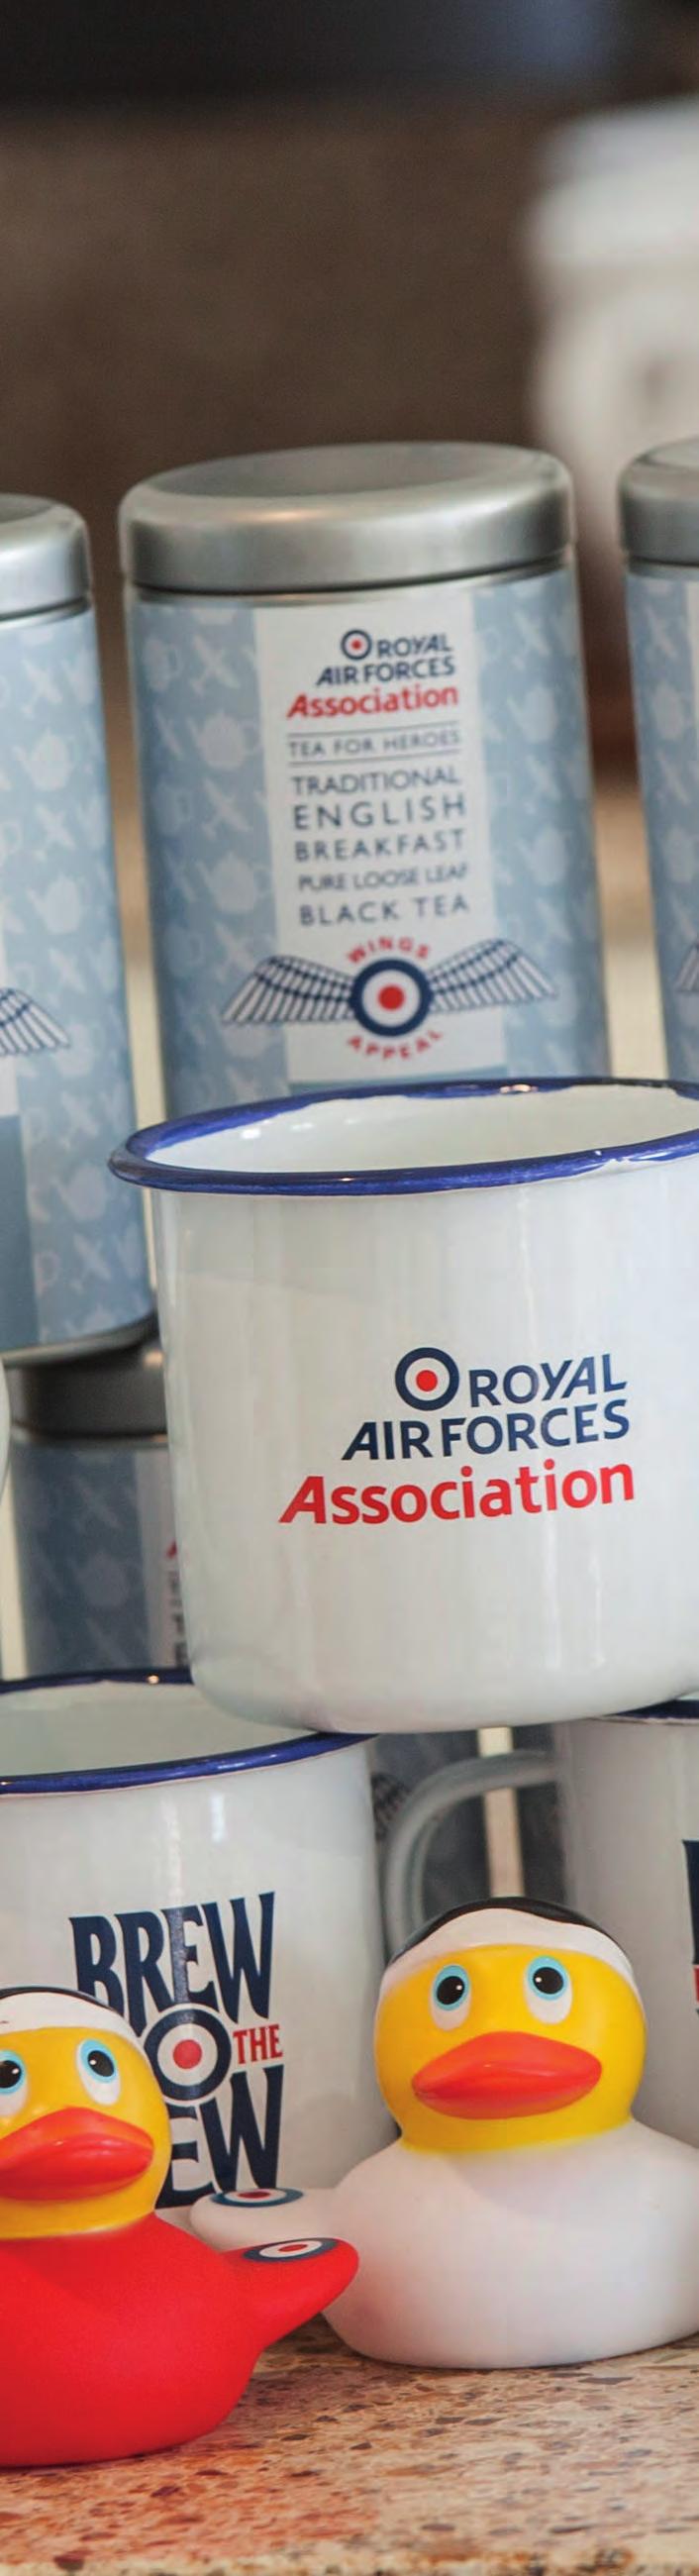 When someone in the RAF family needs help, the charity they turn to is the Royal Air Forces Association.